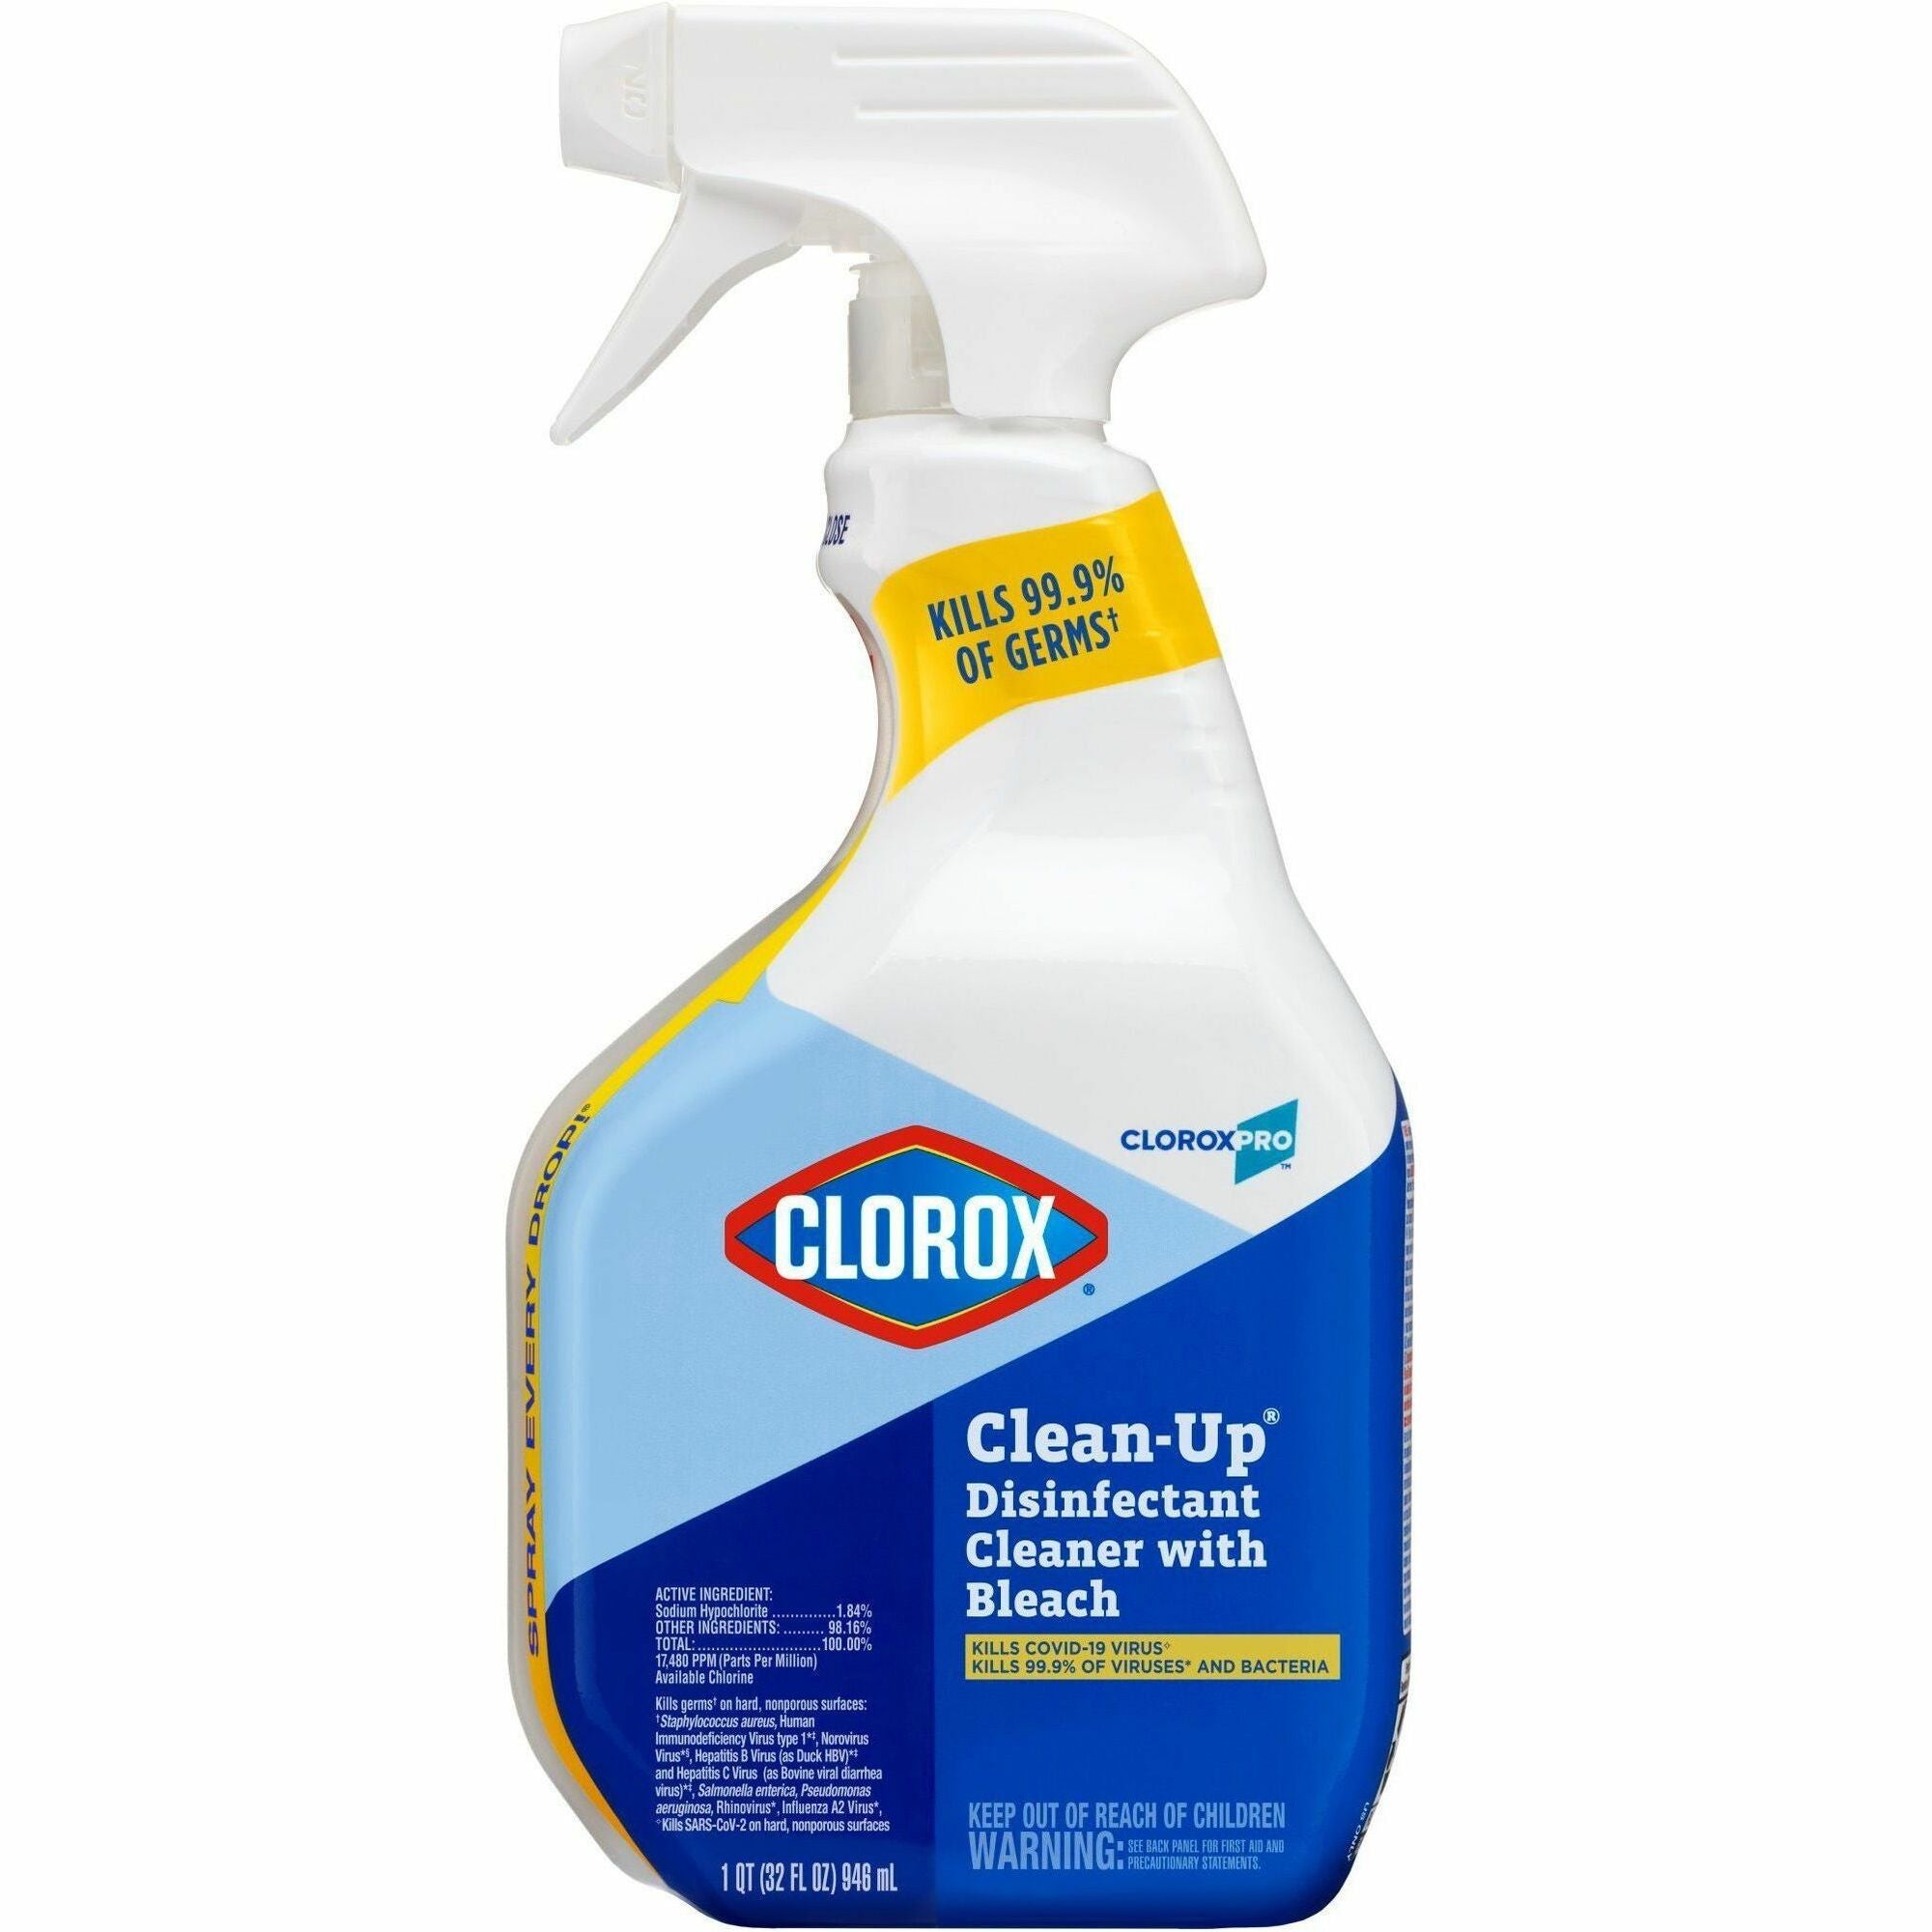 CloroxPro Clean-Up Disinfectant Cleaner with Bleach - Ready-To-Use - 32 fl oz (1 quart) - 216 / Bundle - Antibacterial, Disinfectant - Clear - 1